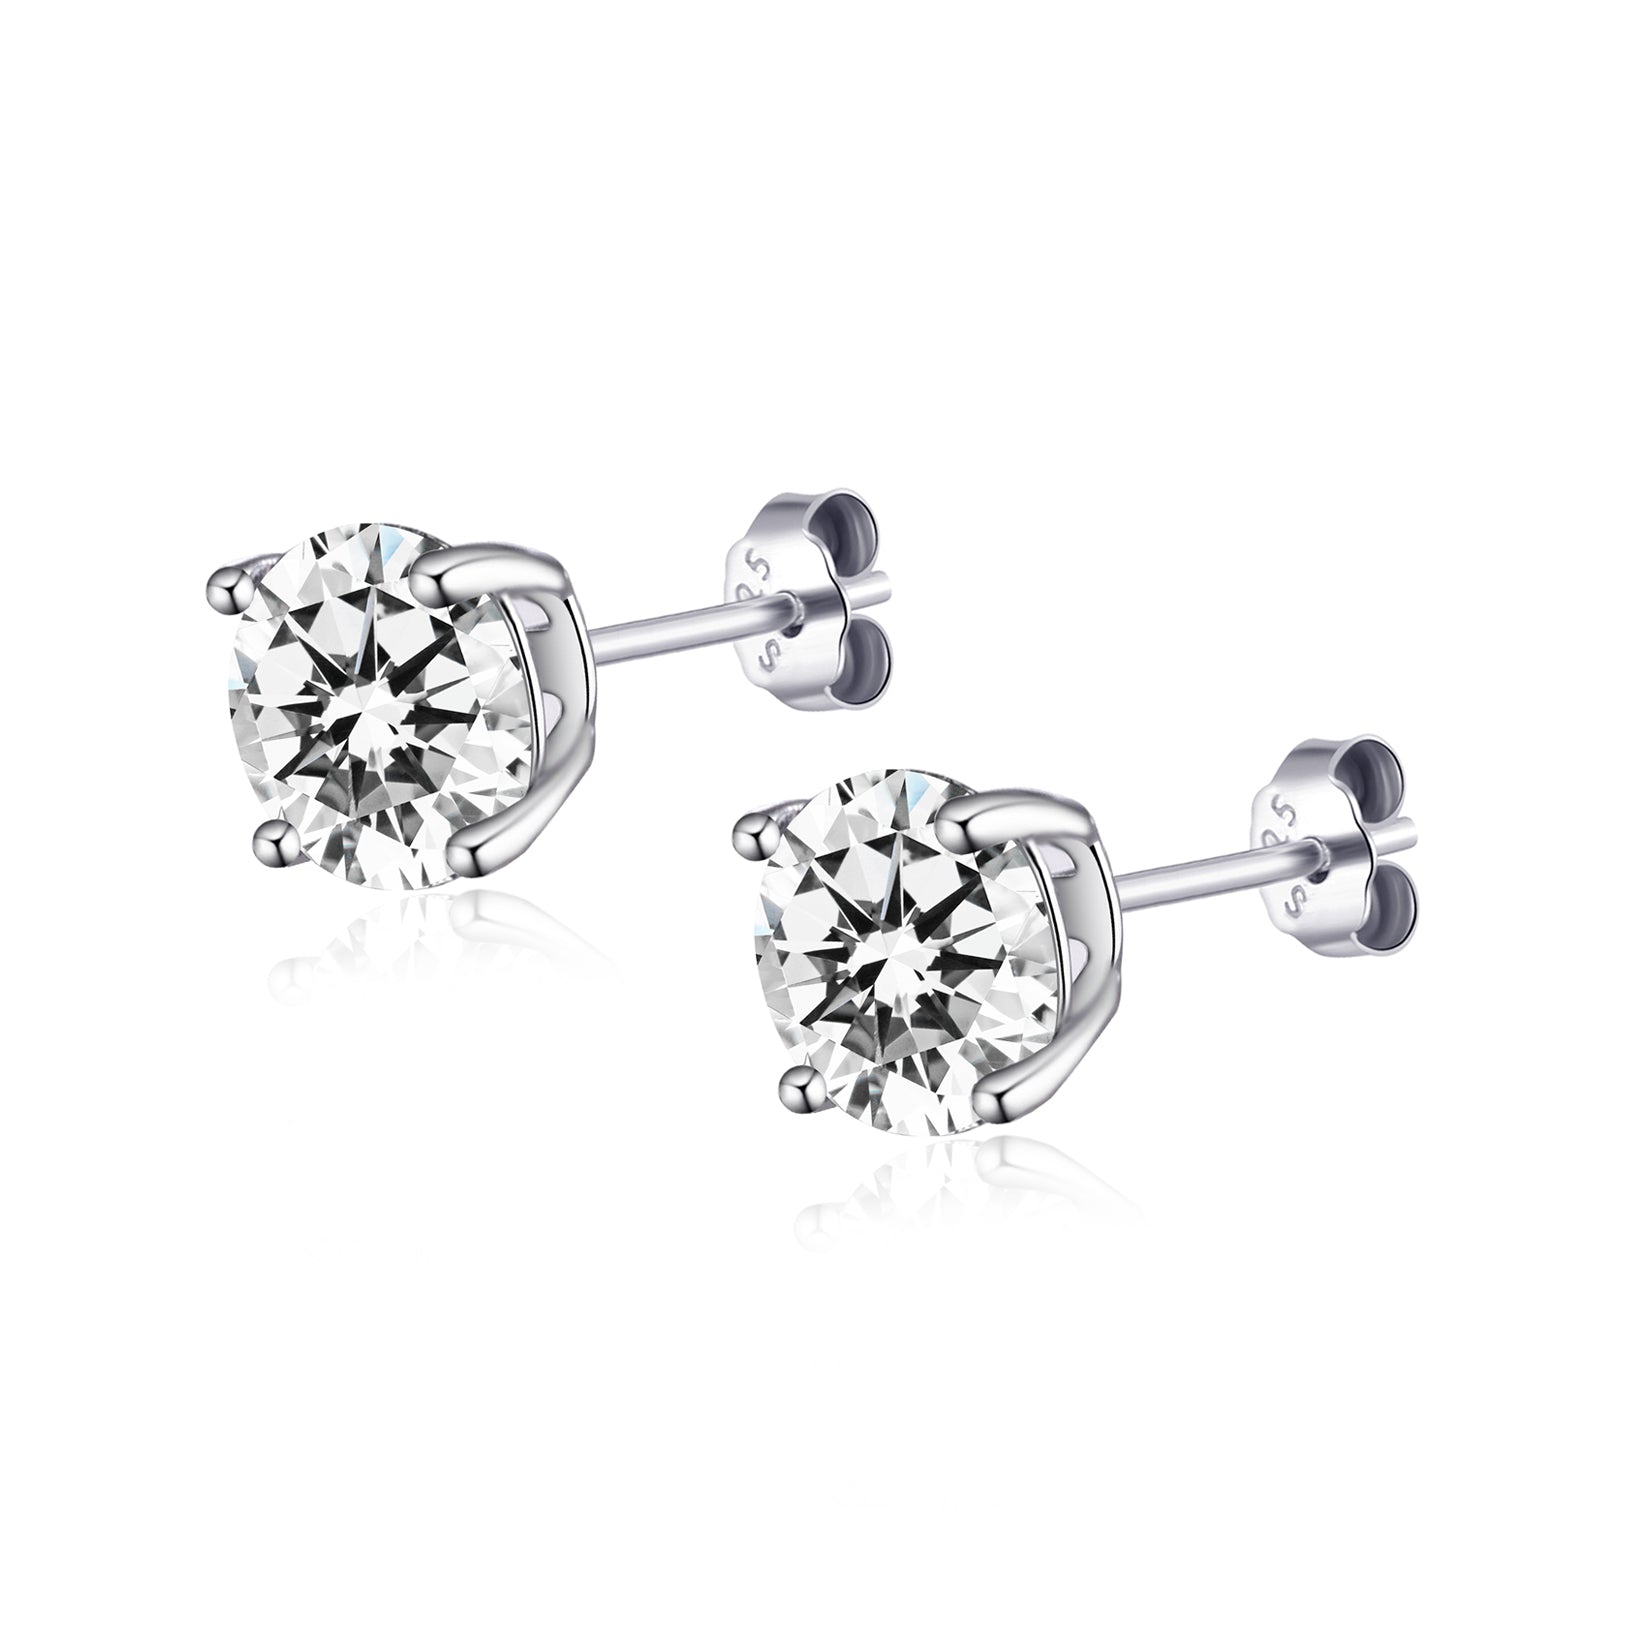 Sterling Silver 6mm Round Earrings Created with Zircondia® Crystals